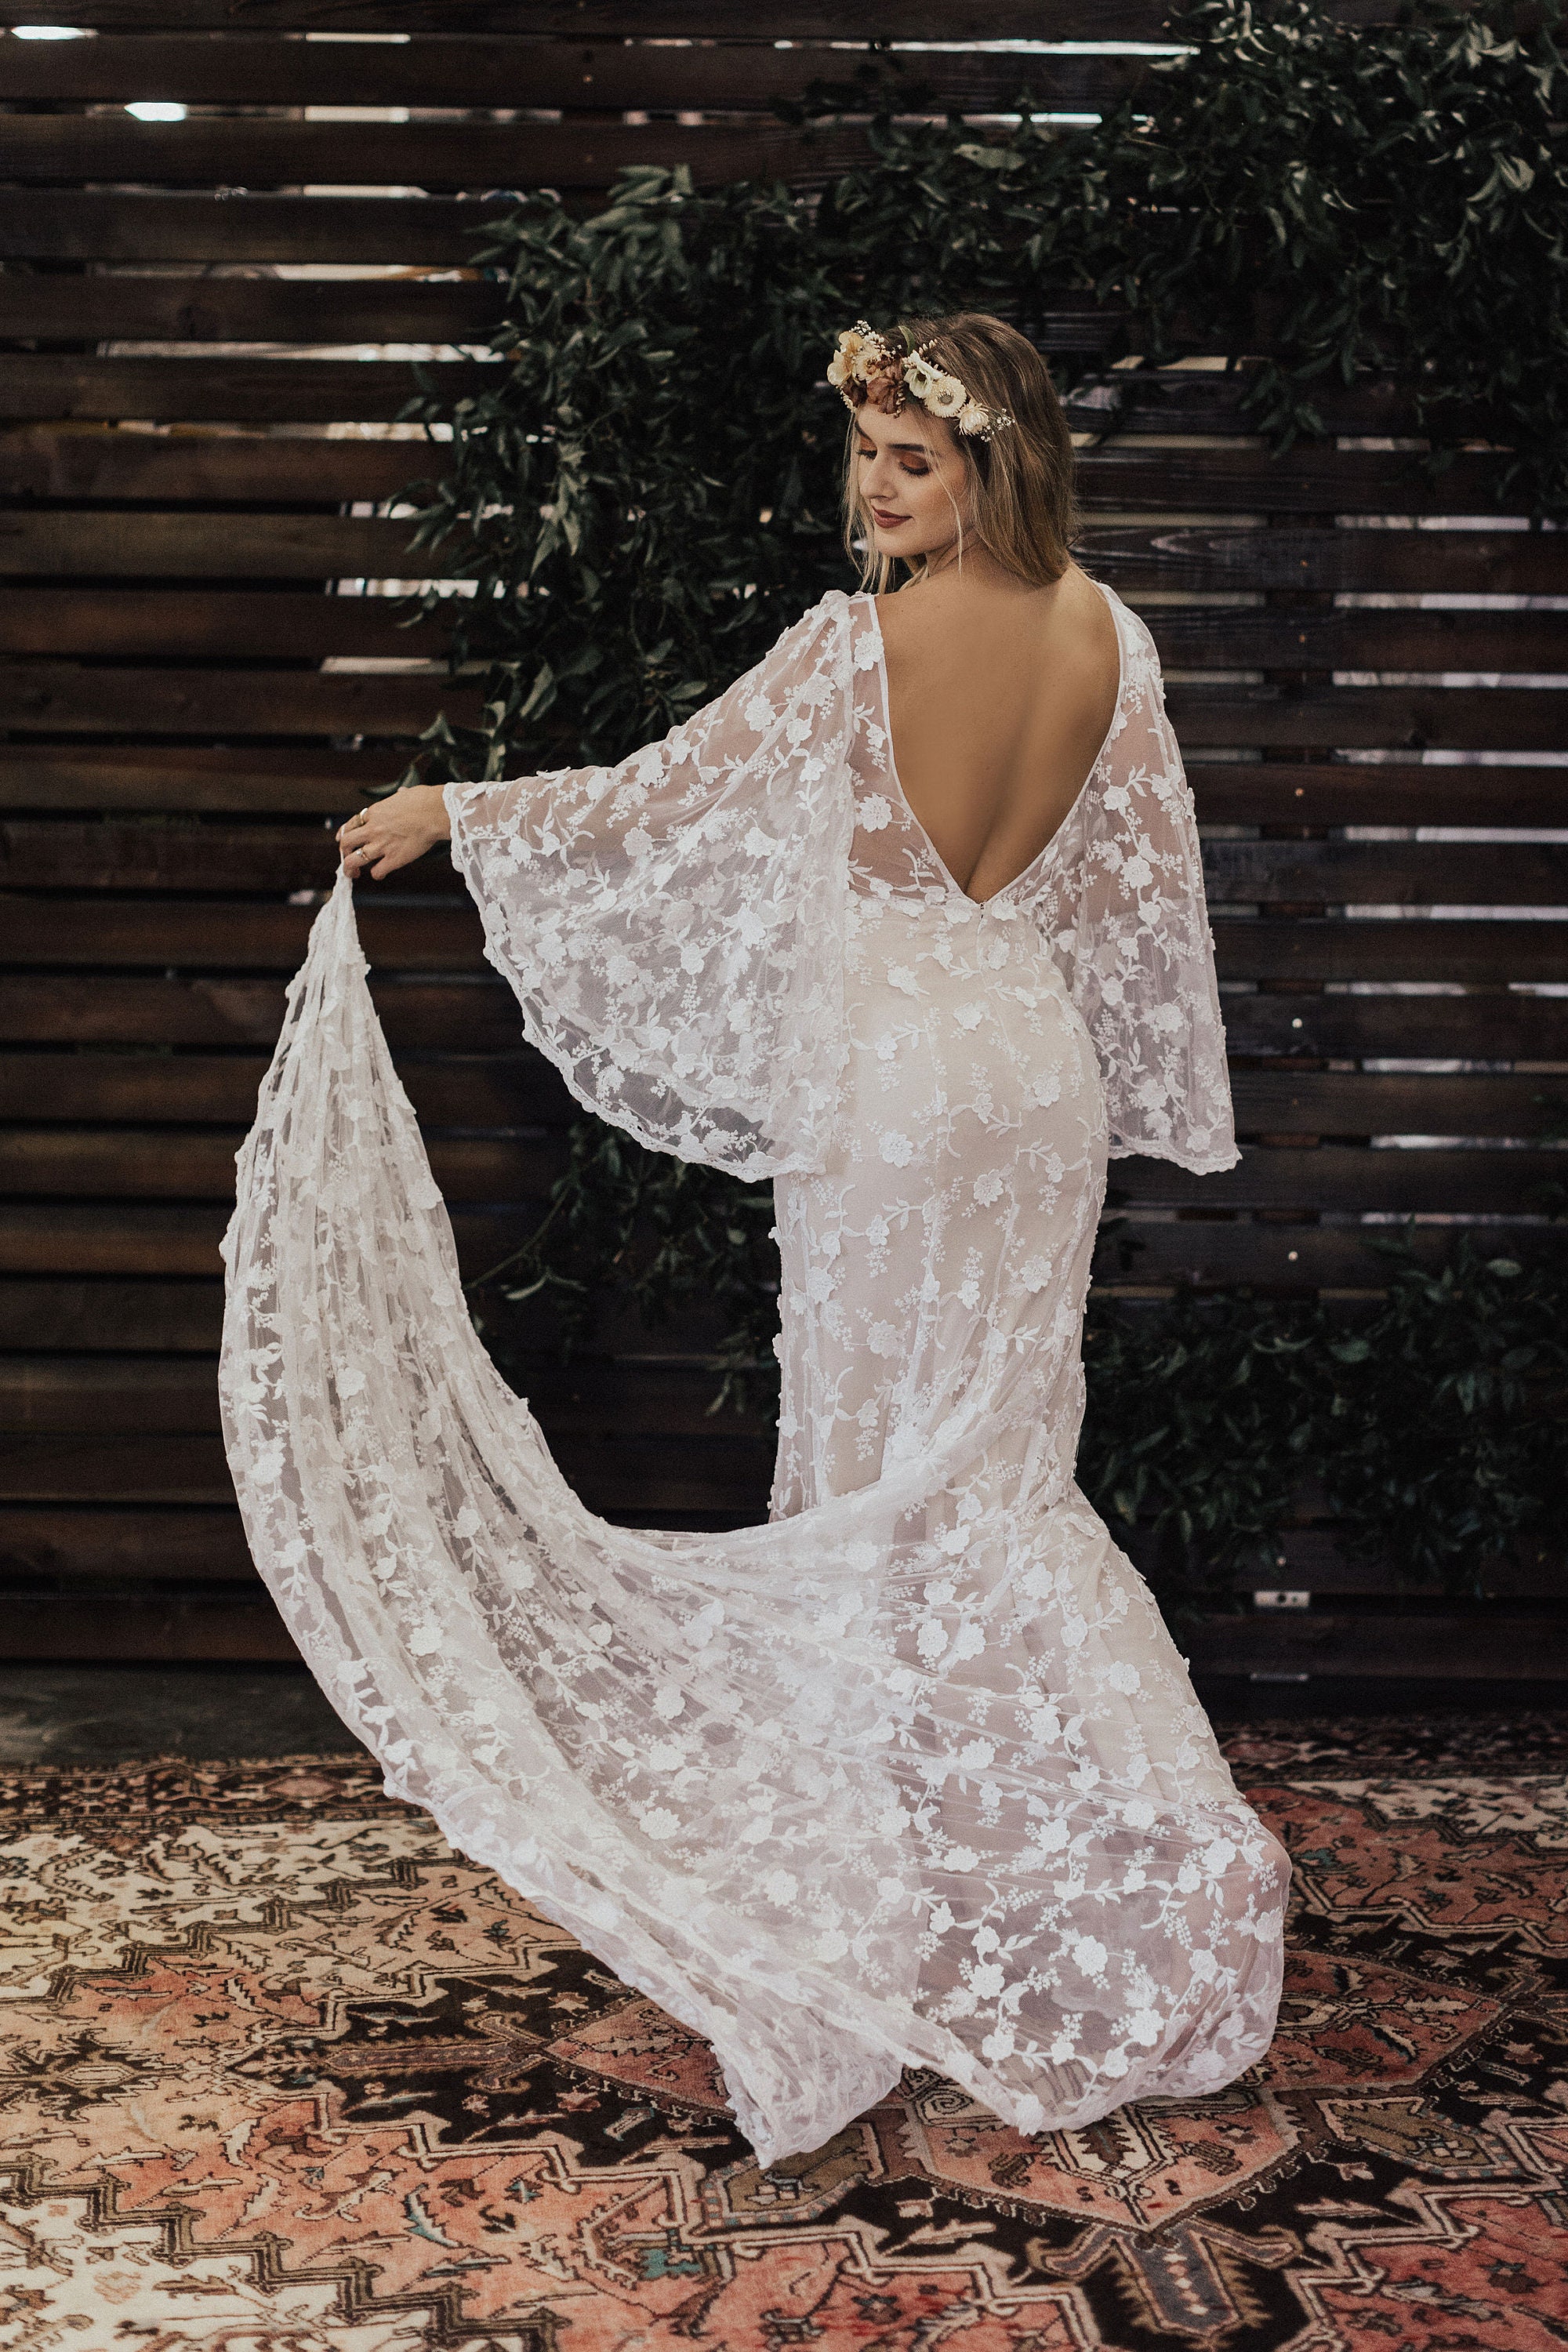 Heaven Must Be Missing An Angel - These Gowns Are Seriously Dreamy